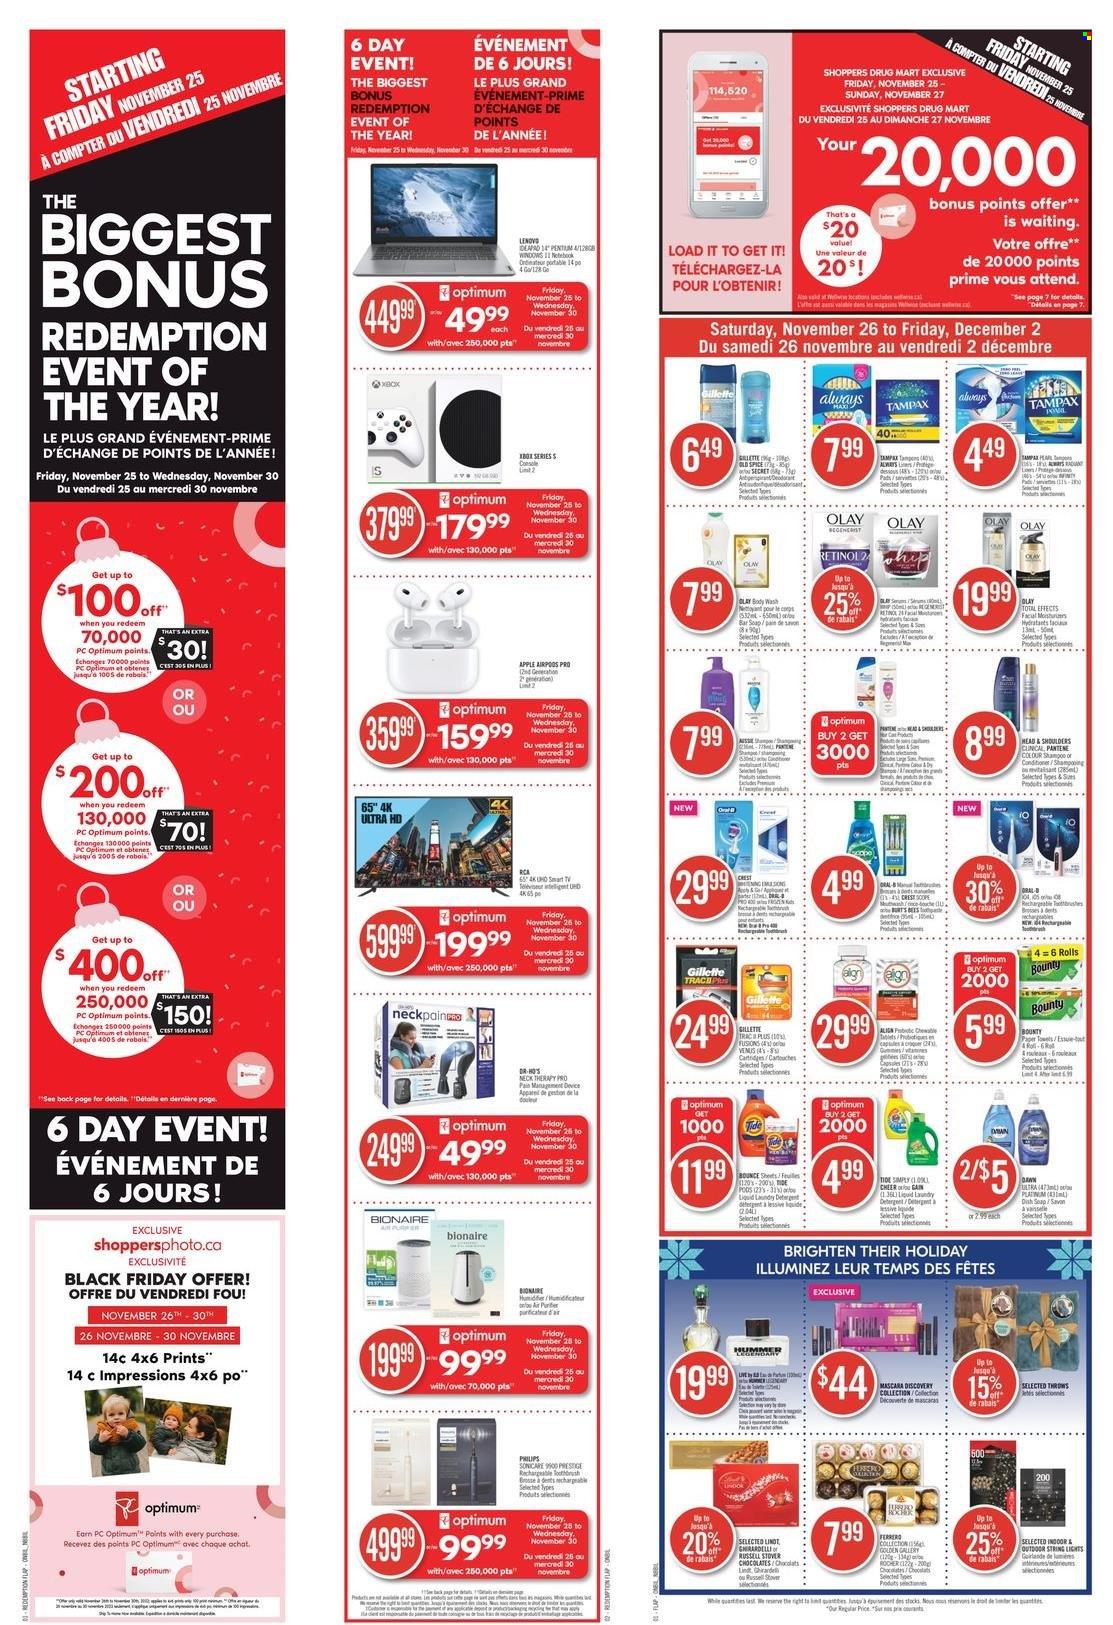 thumbnail - Shoppers Drug Mart Flyer - November 26, 2022 - December 02, 2022 - Sales products - Philips, chocolate, Bounty, spice, kitchen towels, paper towels, Gain, laundry detergent, Bounce, soap bar, soap, toothbrush, tampons, Gillette, moisturizer, Olay, conditioner, mascara, Optimum, Sonicare, detergent, Lenovo, shampoo, Tampax, Lindt, Ferrero Rocher, Xbox. Page 24.